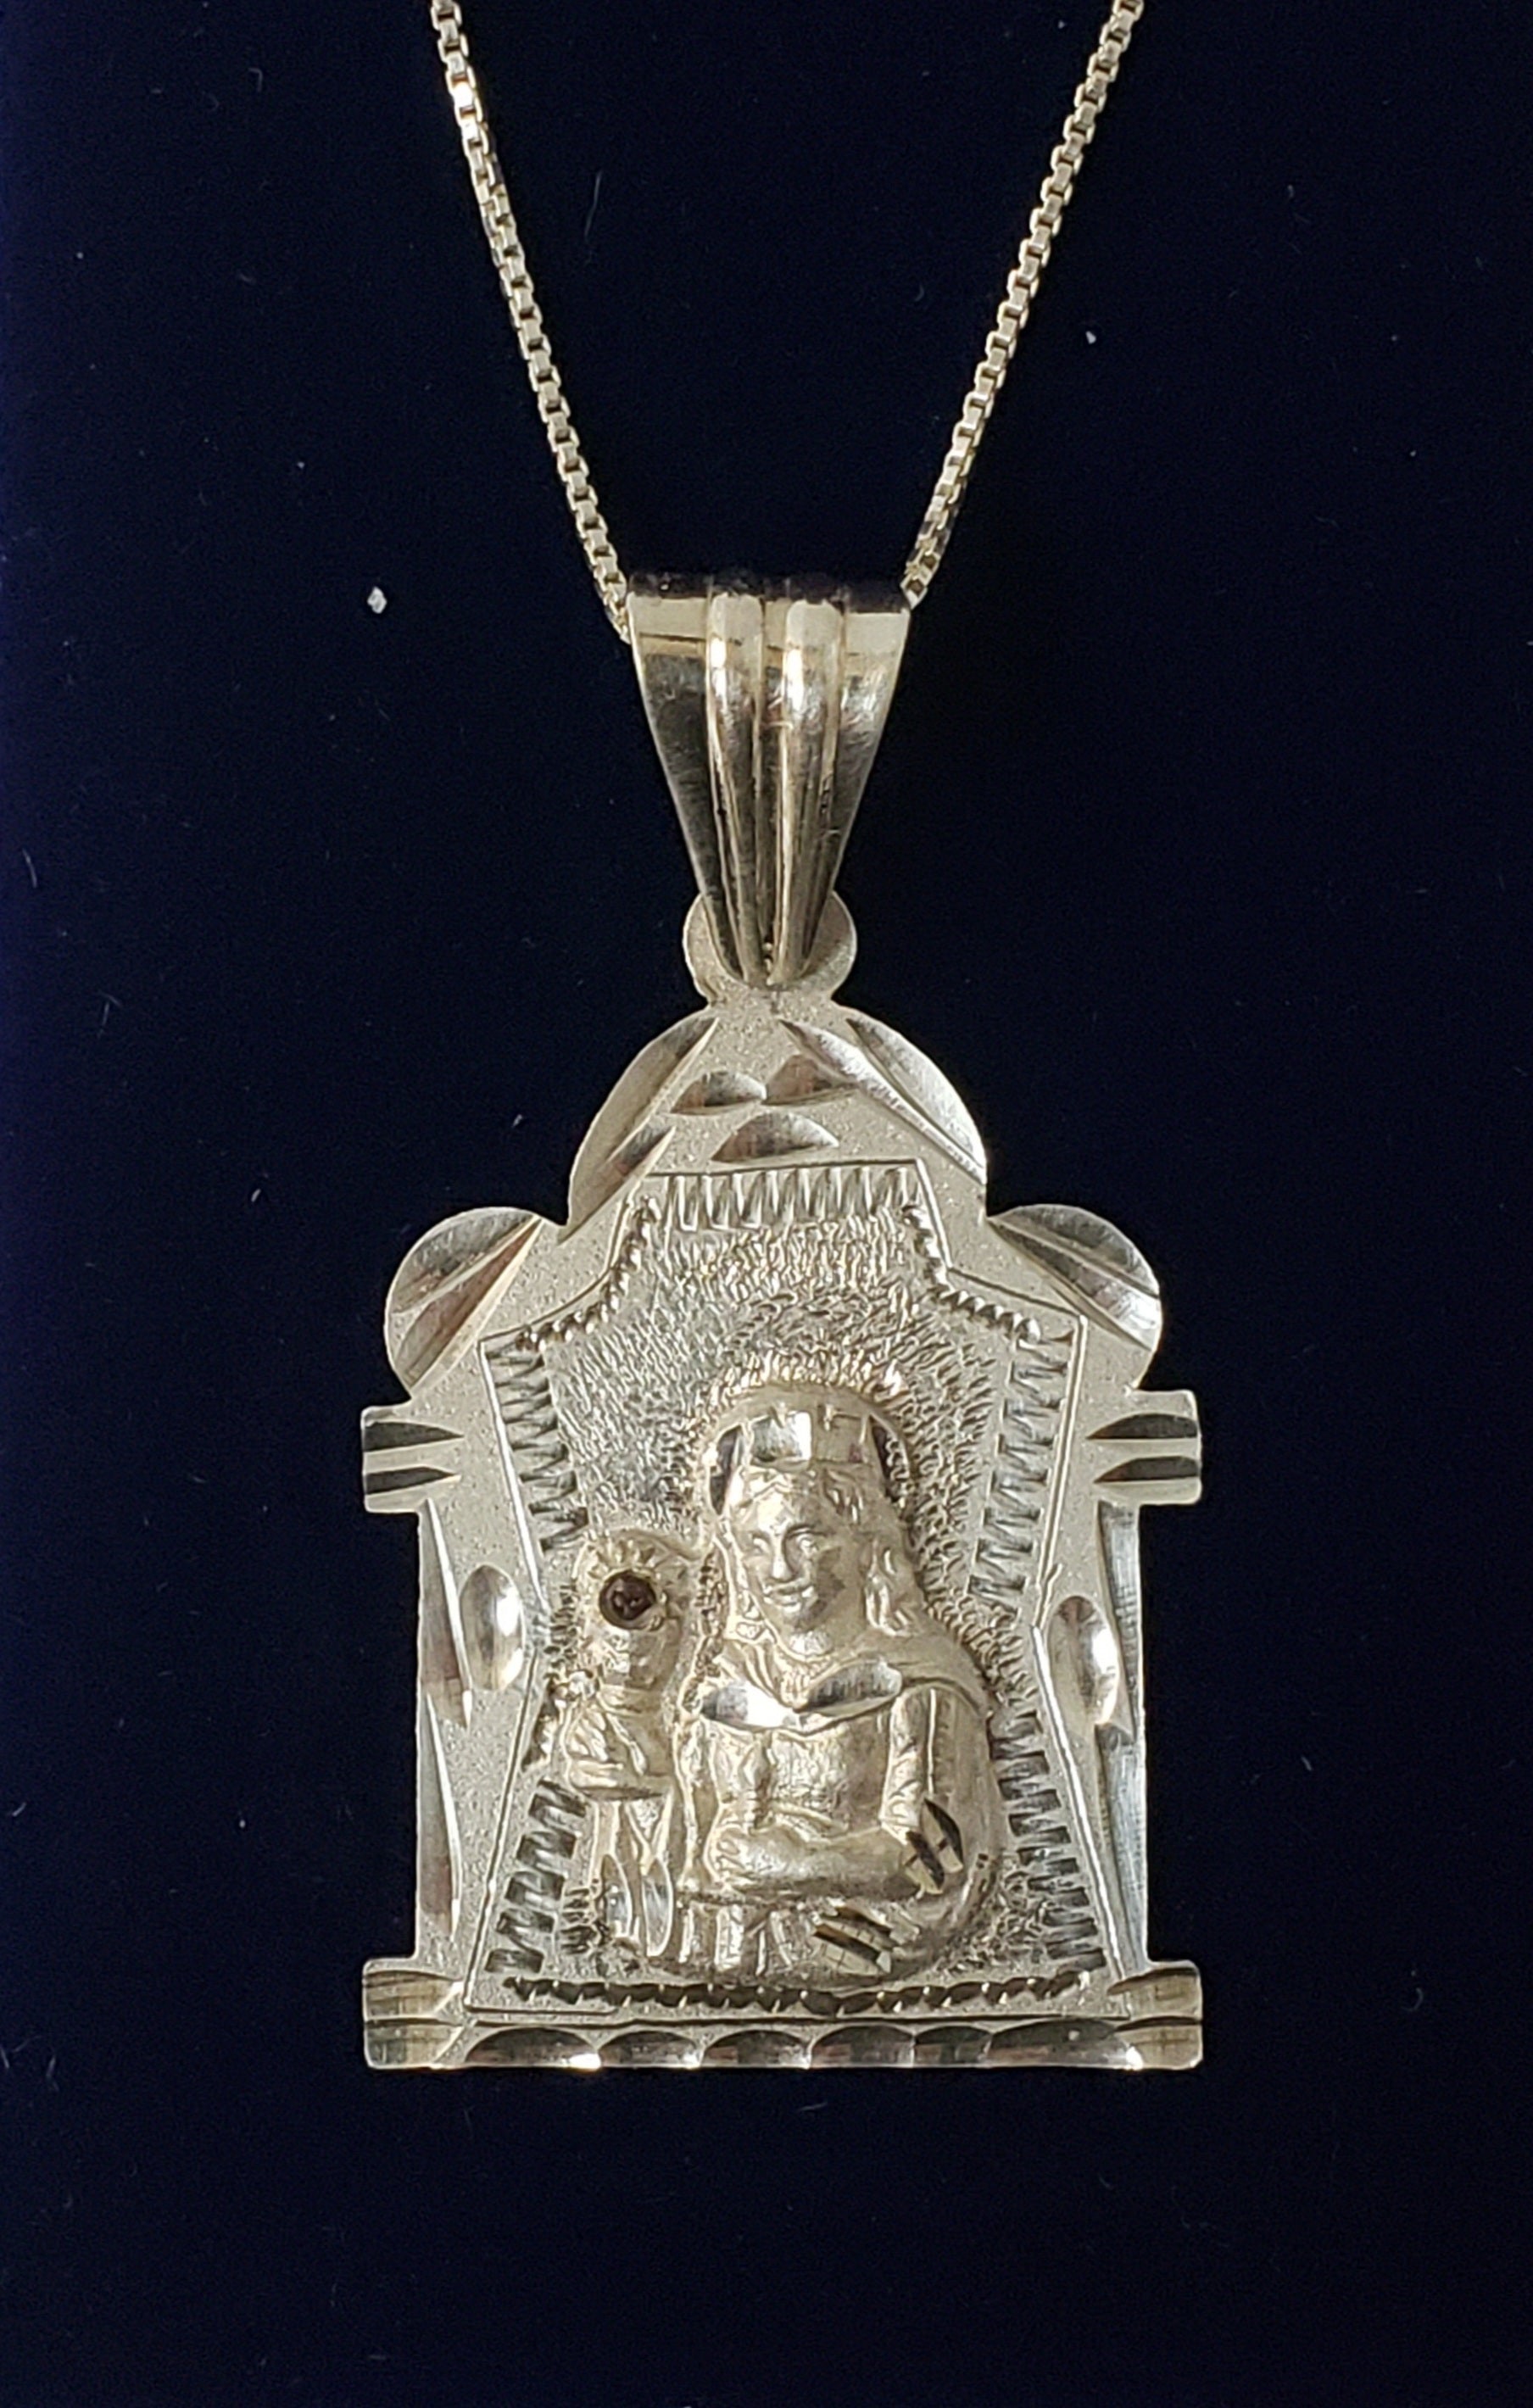 Hand Made 925 Sterling Silver Santa Barbara Pendant 4 1/2cm X 2 1/2cm With Sliver Chain